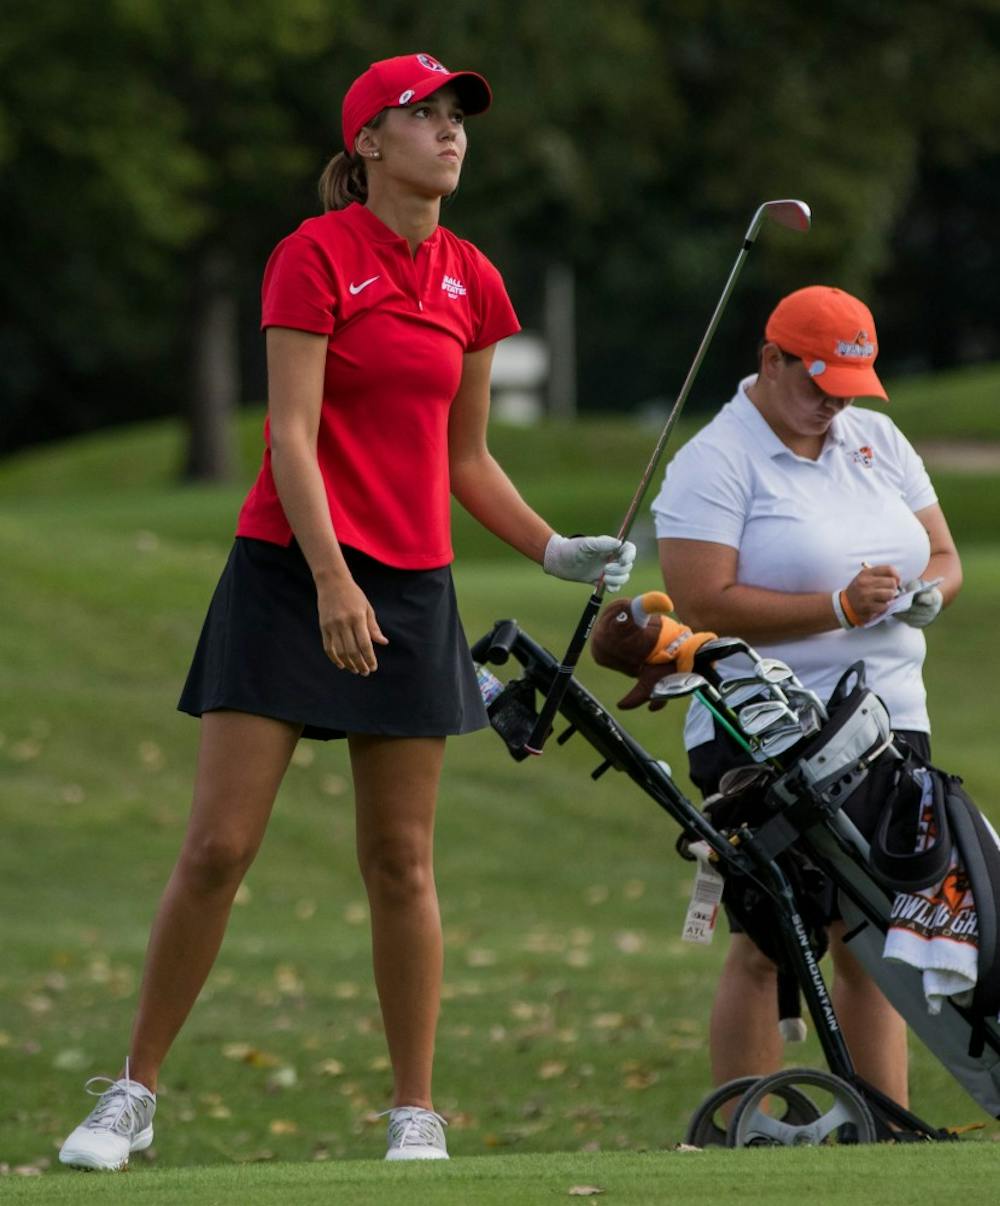 Freshman Hadley Moritz follows her ball to see where it will land Sept. 17, 2018, at the Players Club in Yorktown, Indiana during the Cardinal Classic Golf Tournament. The Cardinal Classics is a two-day golfing event with 36 holes played on the first day and 16 holes on the second. Eric Pritchett,DN